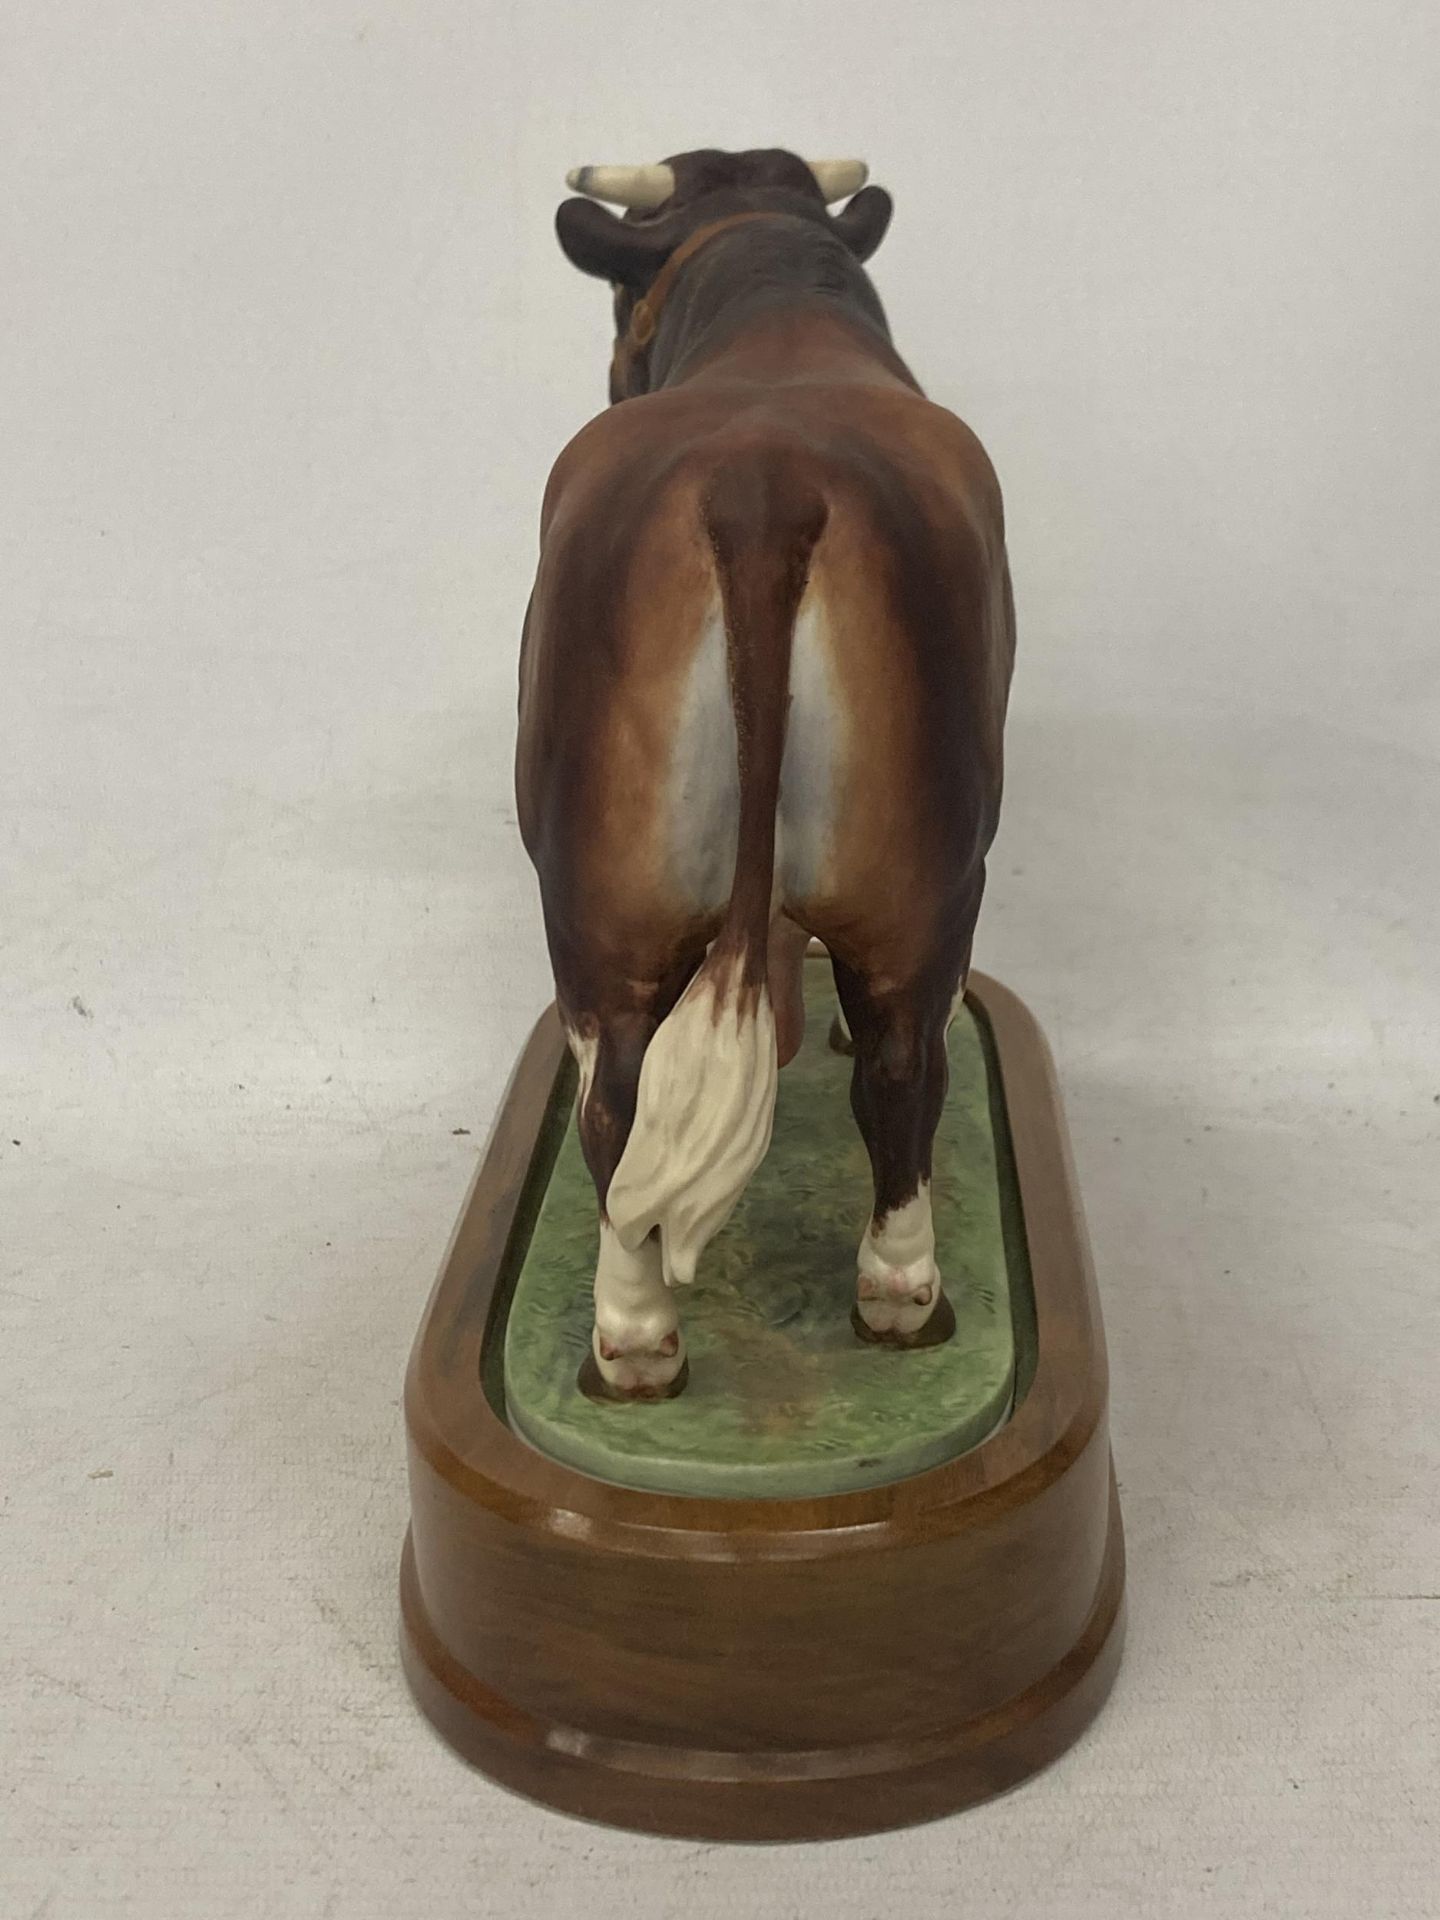 A ROYAL WORCESTER MODEL OF A DAIRY SHORTHORN BULL MODELLED BY DORIS LINDNER PRODUCED IN A LIMITED - Image 4 of 5